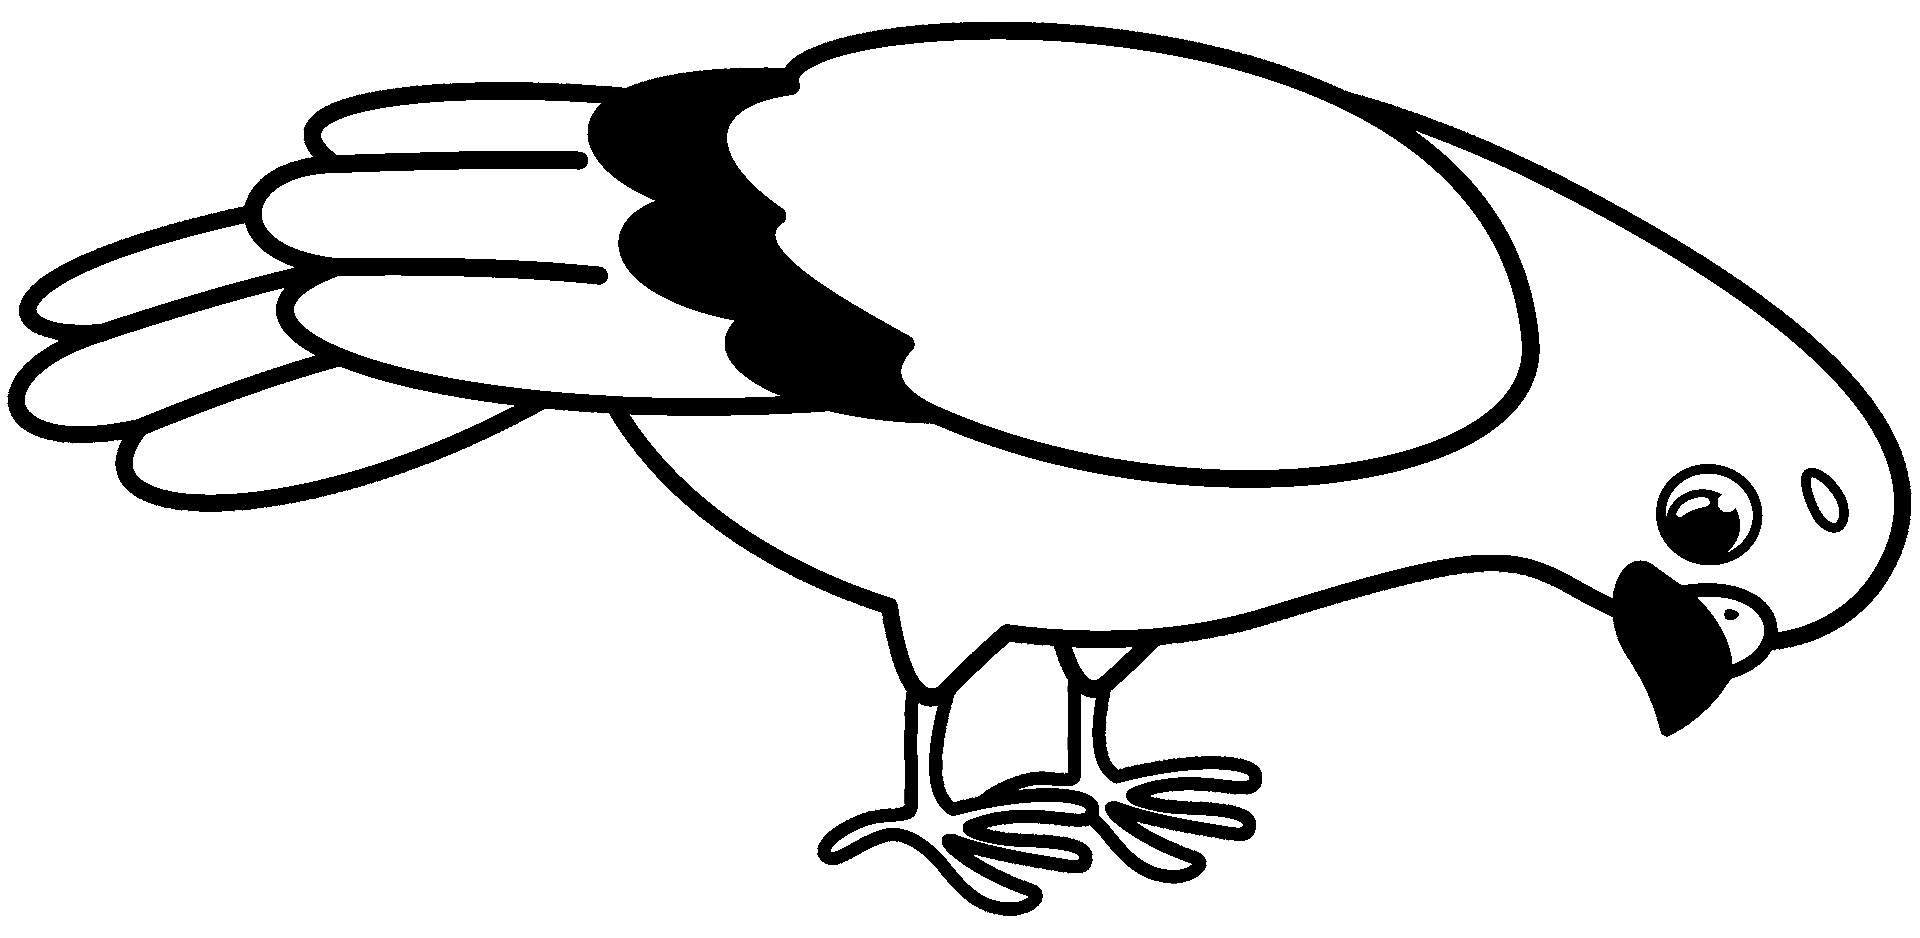 Coloring page of a dove